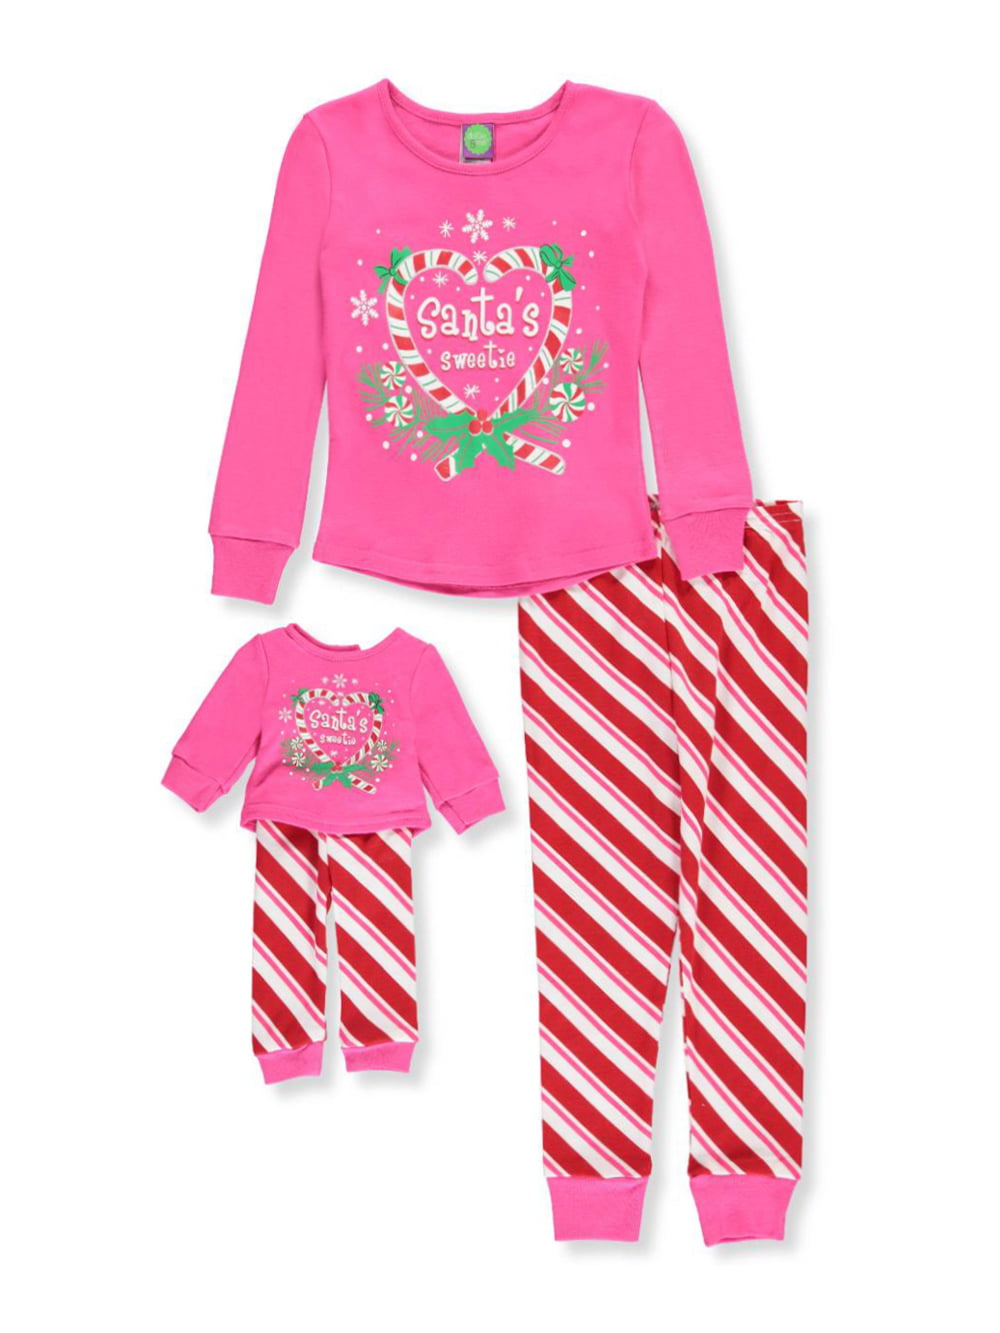 Dollie Me Girl 4-14 and Doll Matching Smart Cookie Pajamas Outfit American Girl 